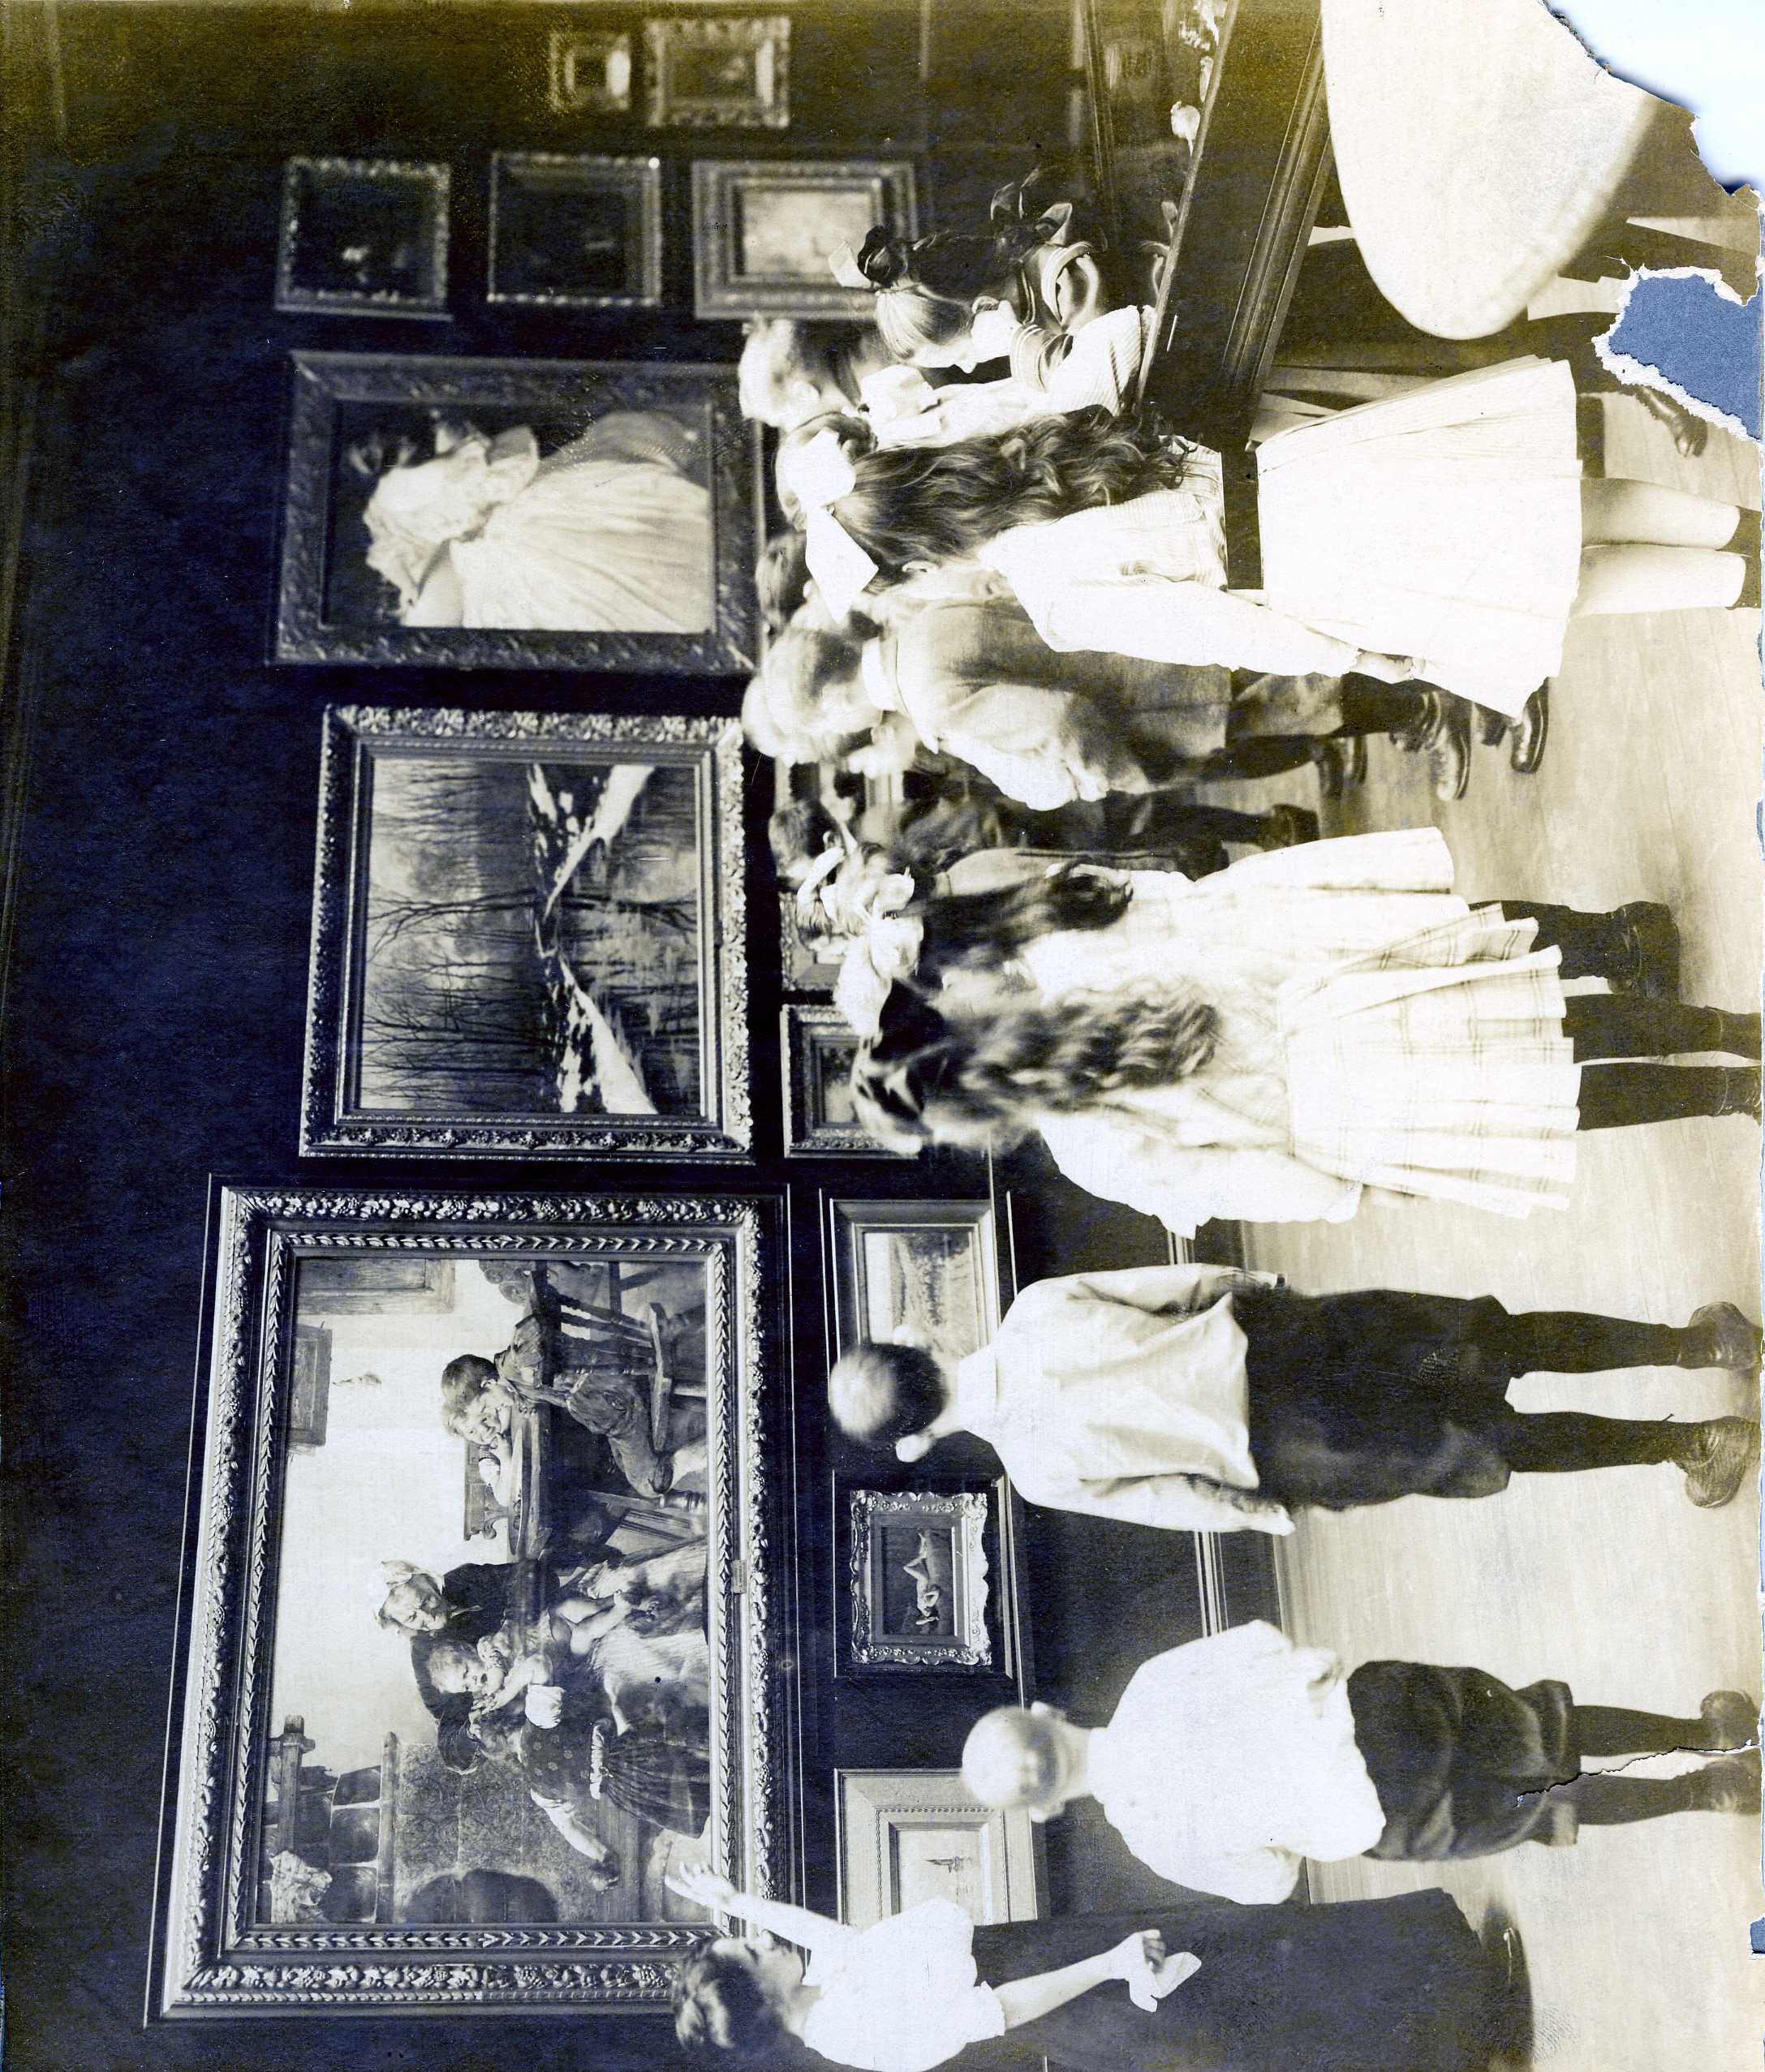 Guided visit, ca. 1915. Staff member may be Margery MacKillop, a museum assistant and educator who was largely responsible for establishing the RISD Museum’s programming for public school students. Courtesy of the RISD Archives.